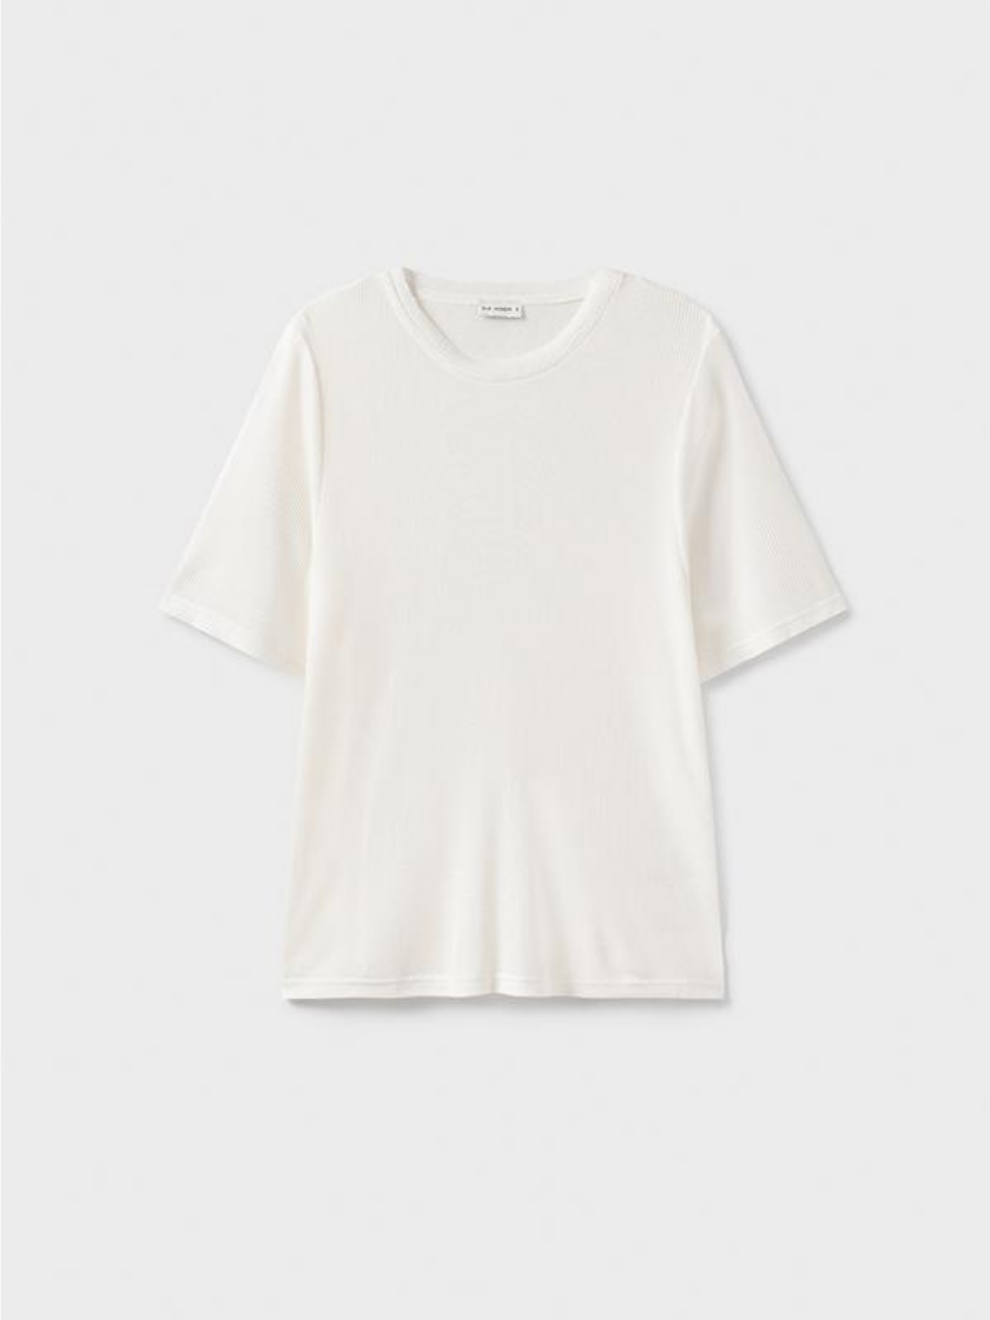 Silk White Ribbed T-shirt by Silk Laundry.